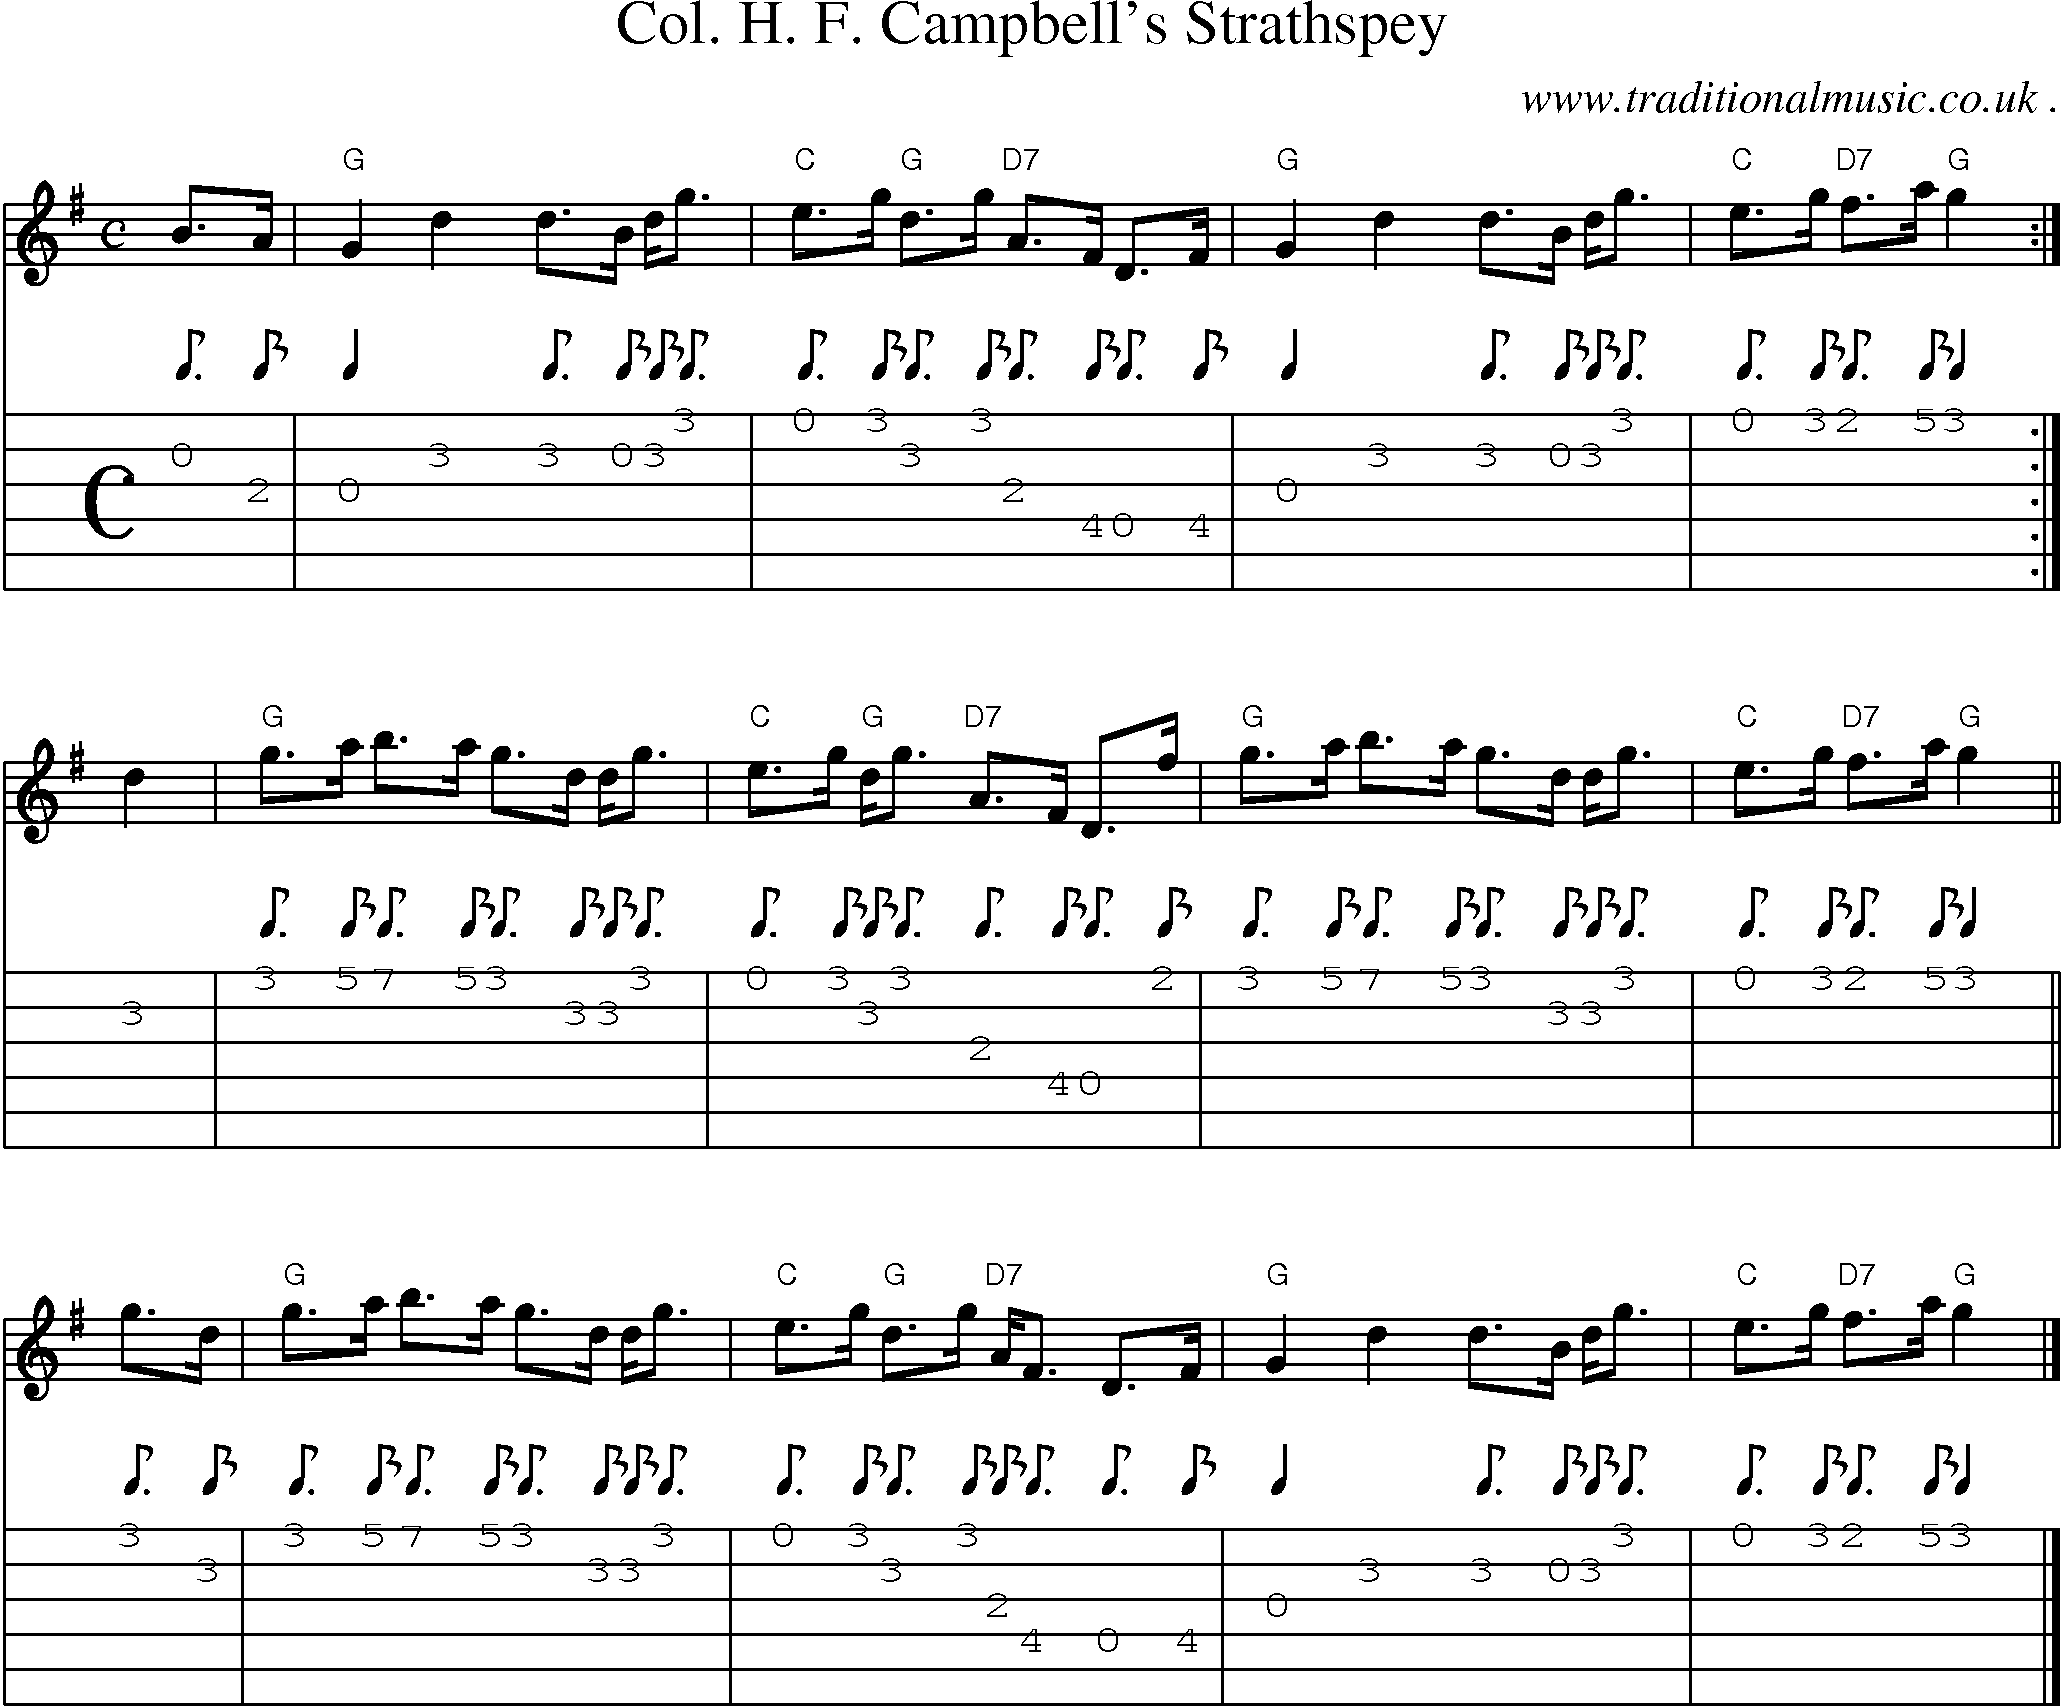 Sheet-music  score, Chords and Guitar Tabs for Col H F Campbells Strathspey